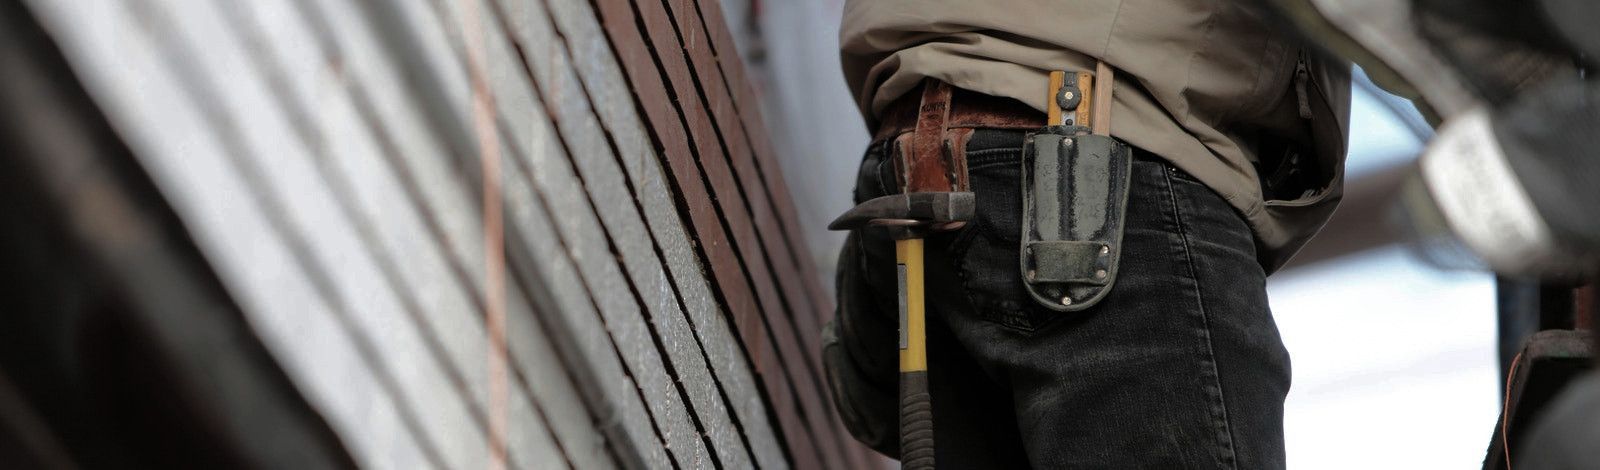 Sideview photo of a construction worker's tool belt on his waist. He wears a tan jacket and black jeans. From his belt hangs a hammer with a yellow handle and another tool that is sheathed. He stands with his back to a wall with boards that are red-brown,